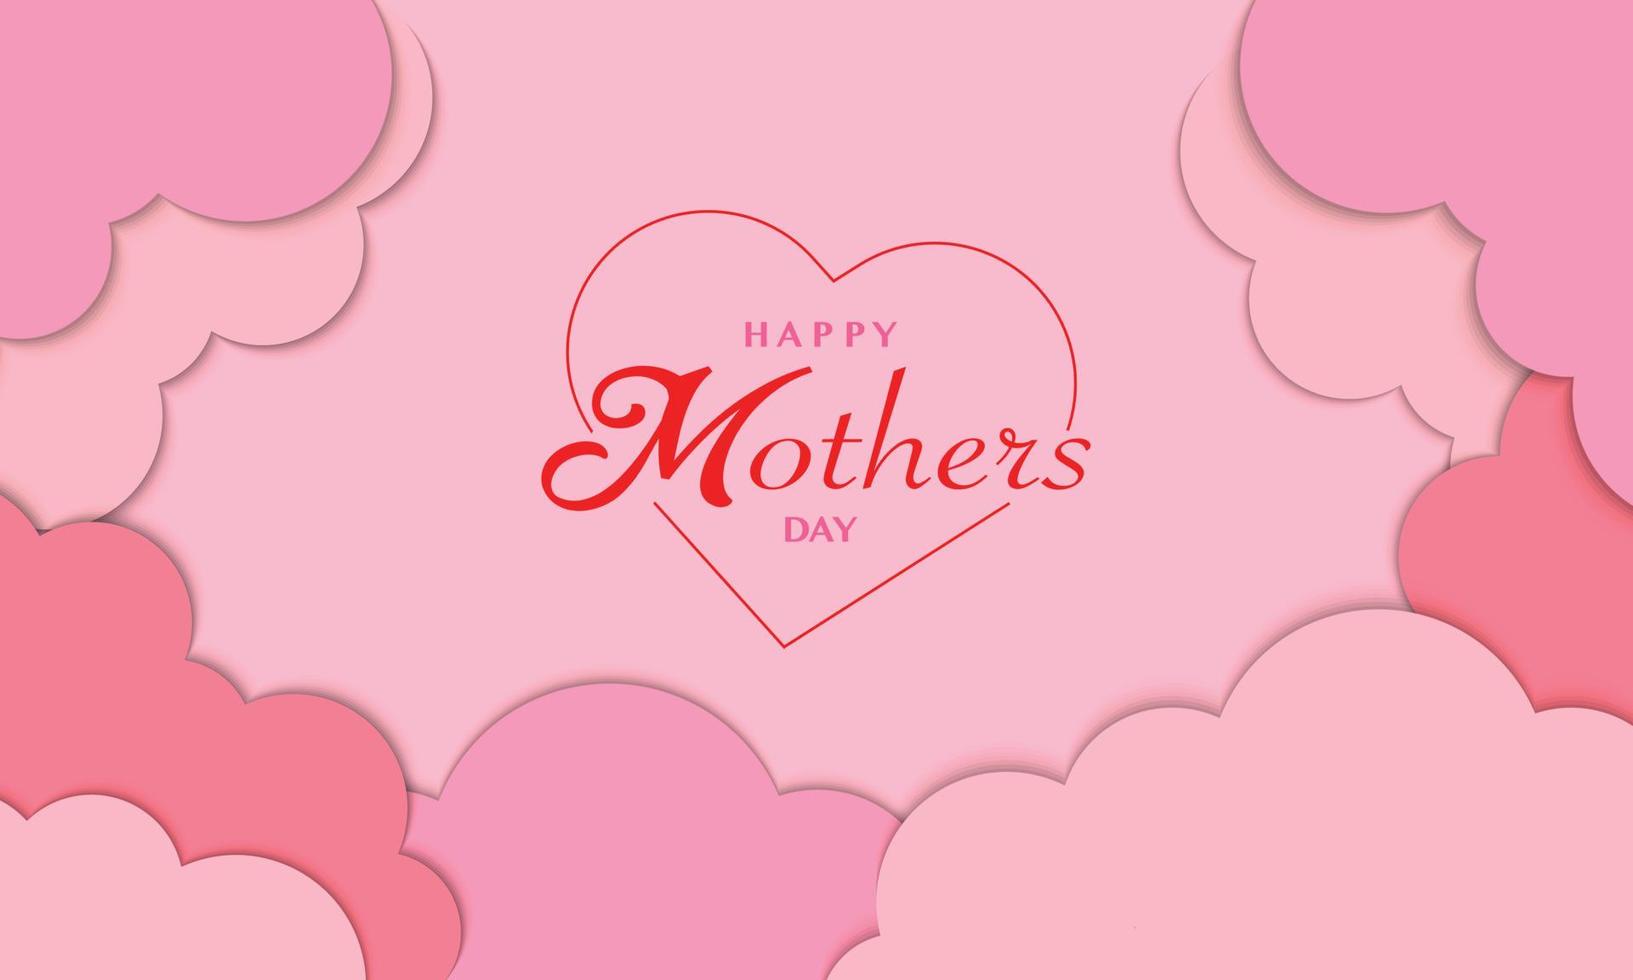 Happy Mother's Day With Cloud Template vector